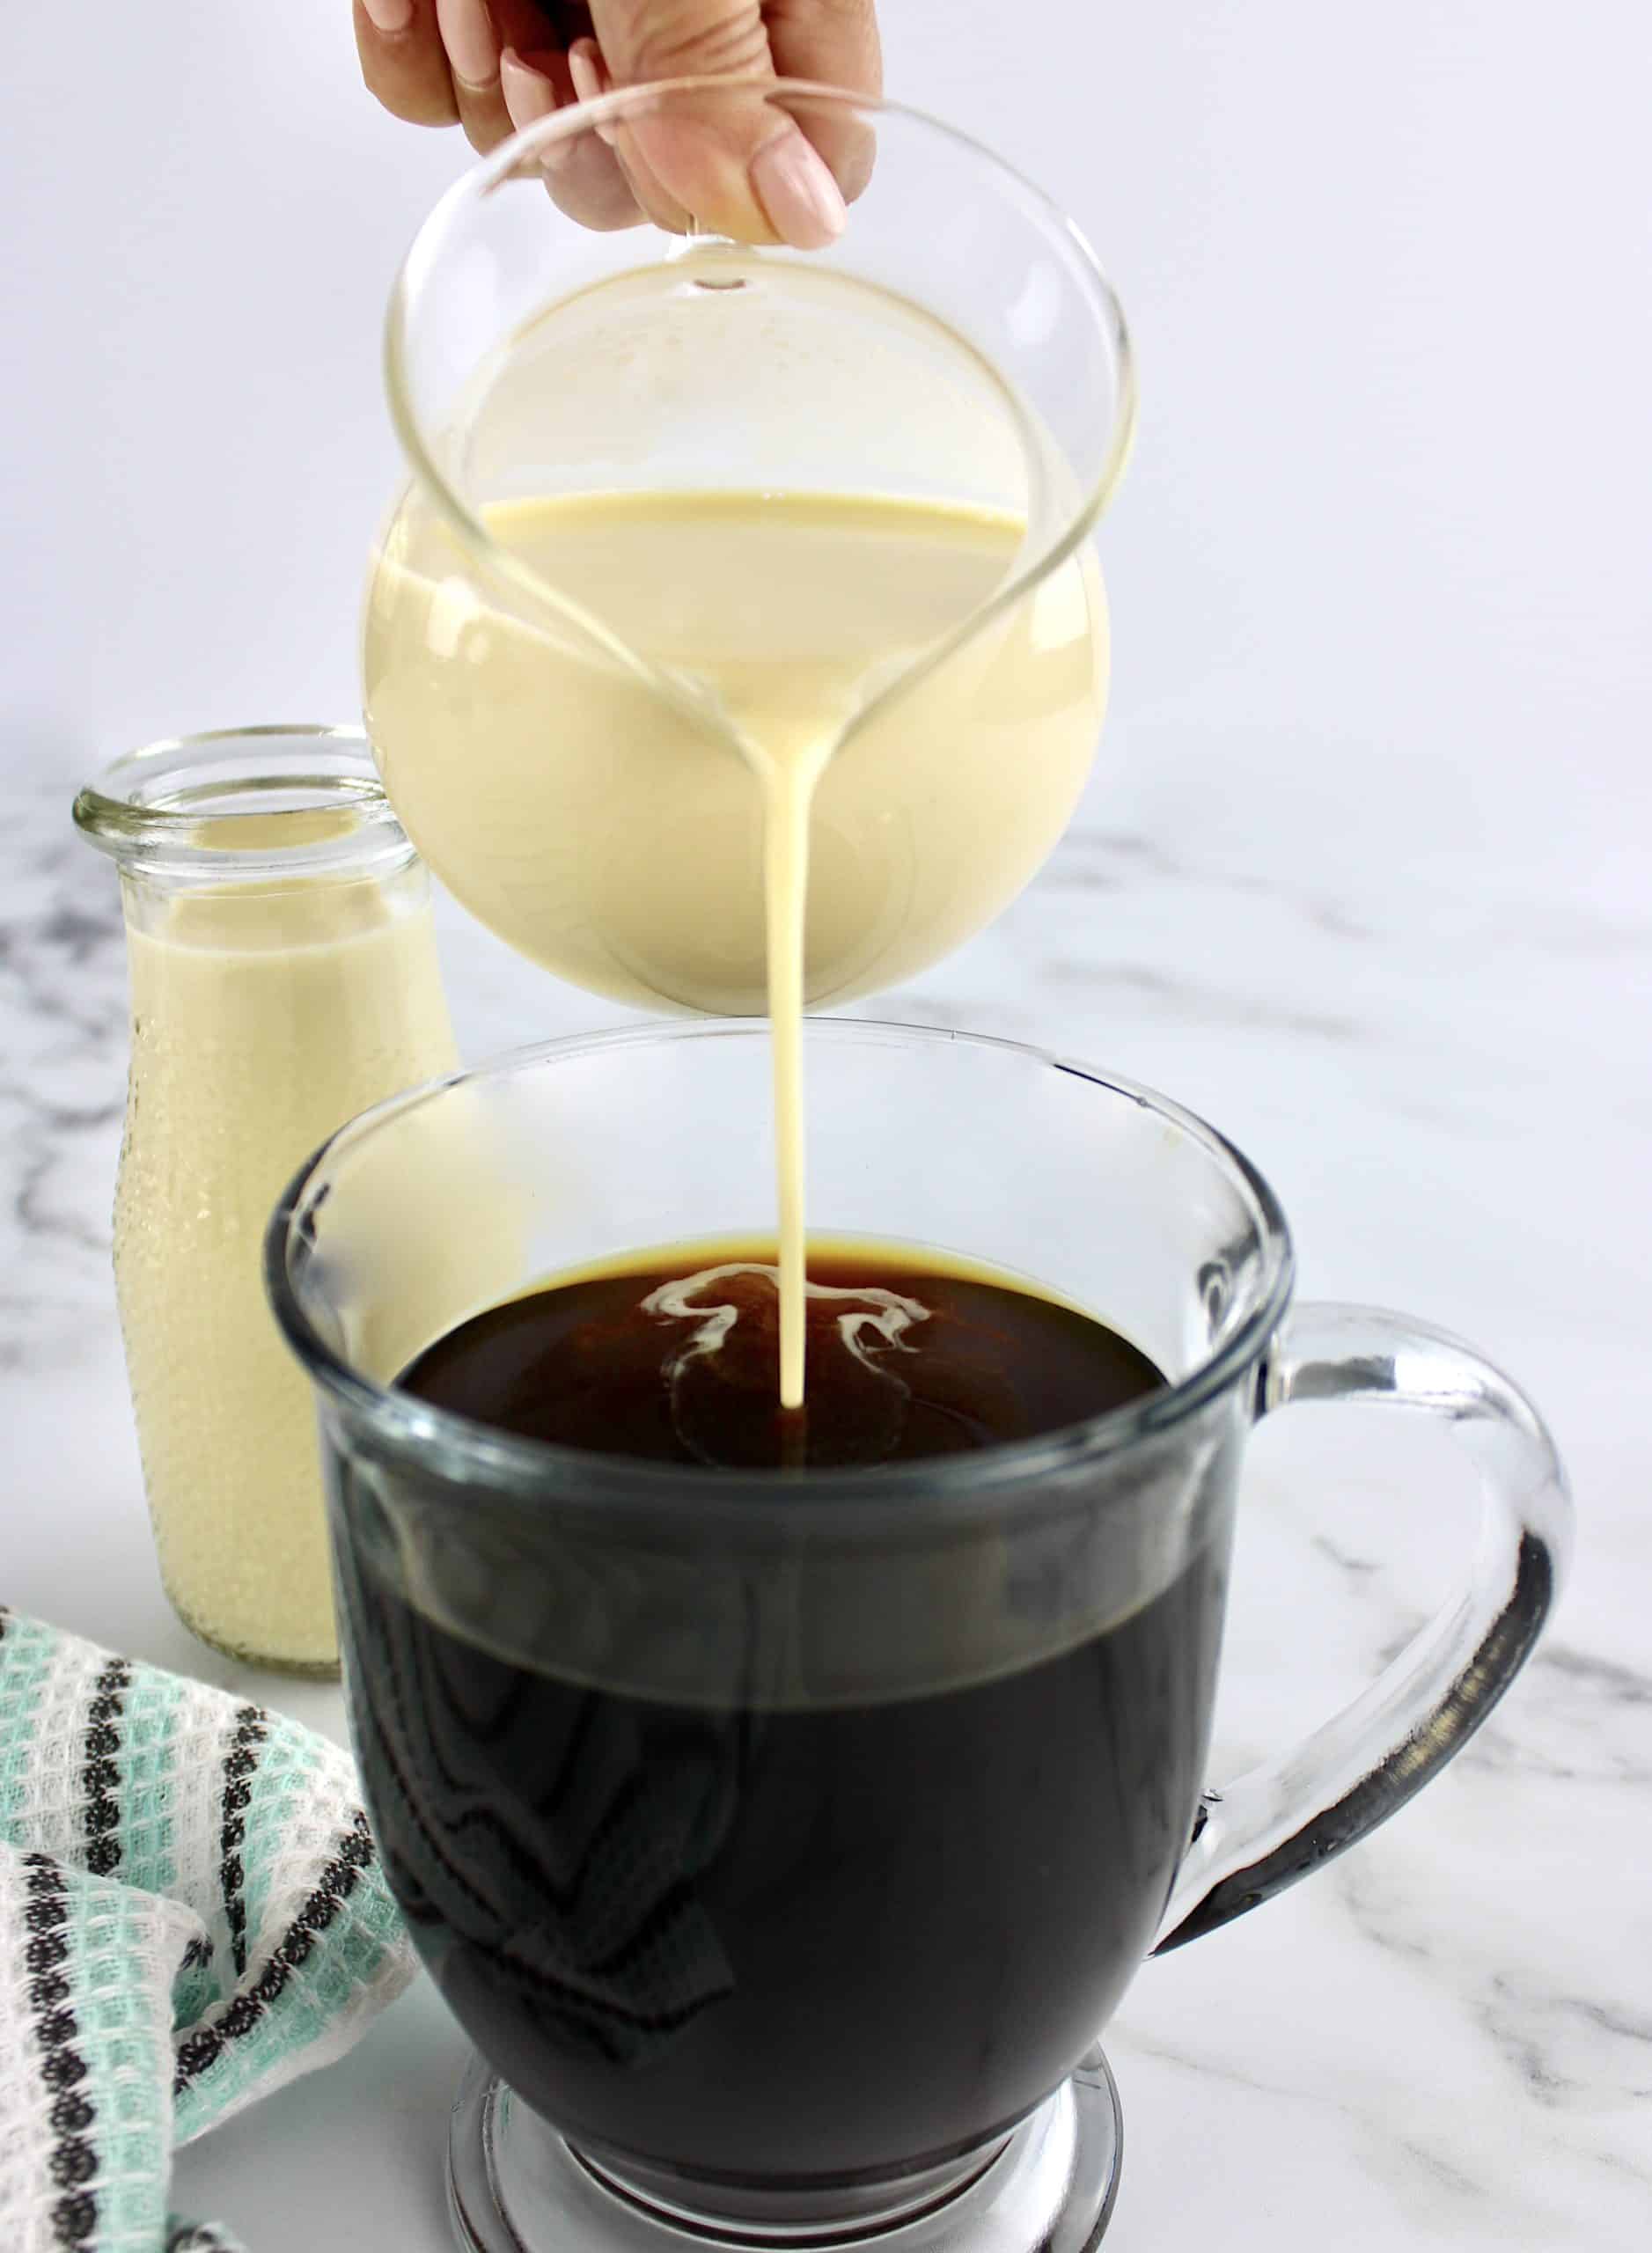 creamer being poured into black coffee in glass mug